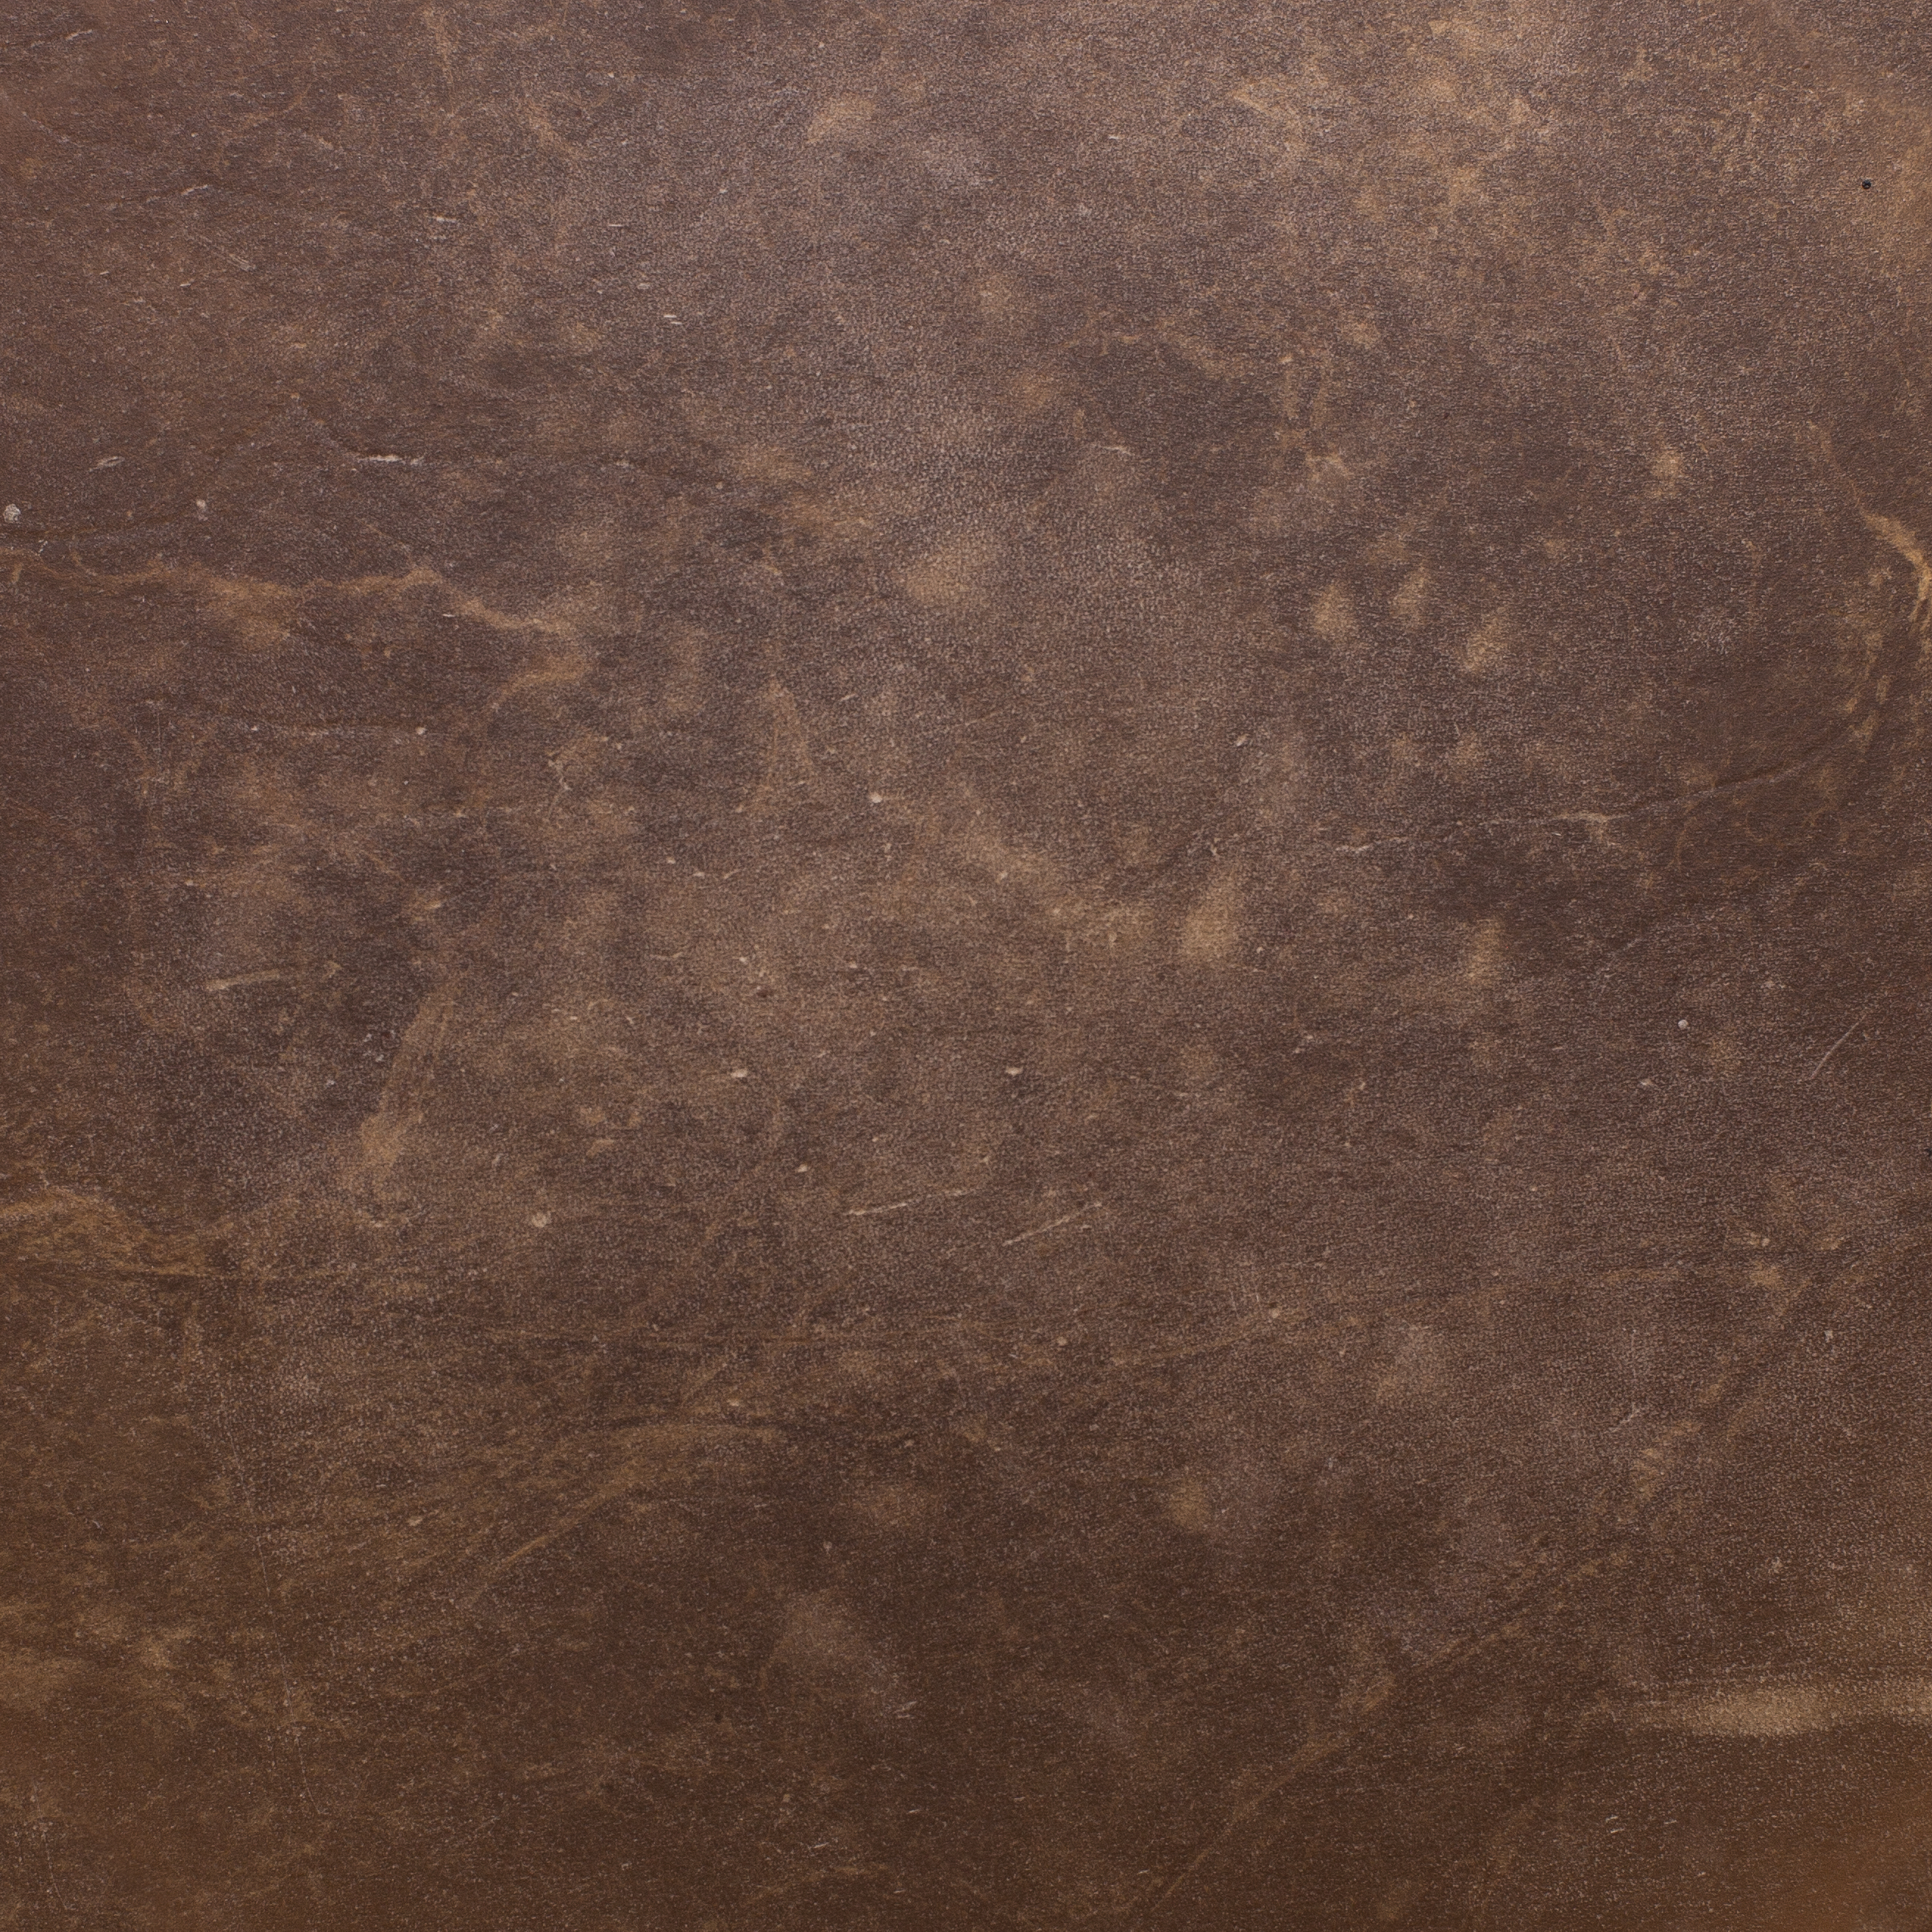 Free high resolution Leather textures | Wild Textures